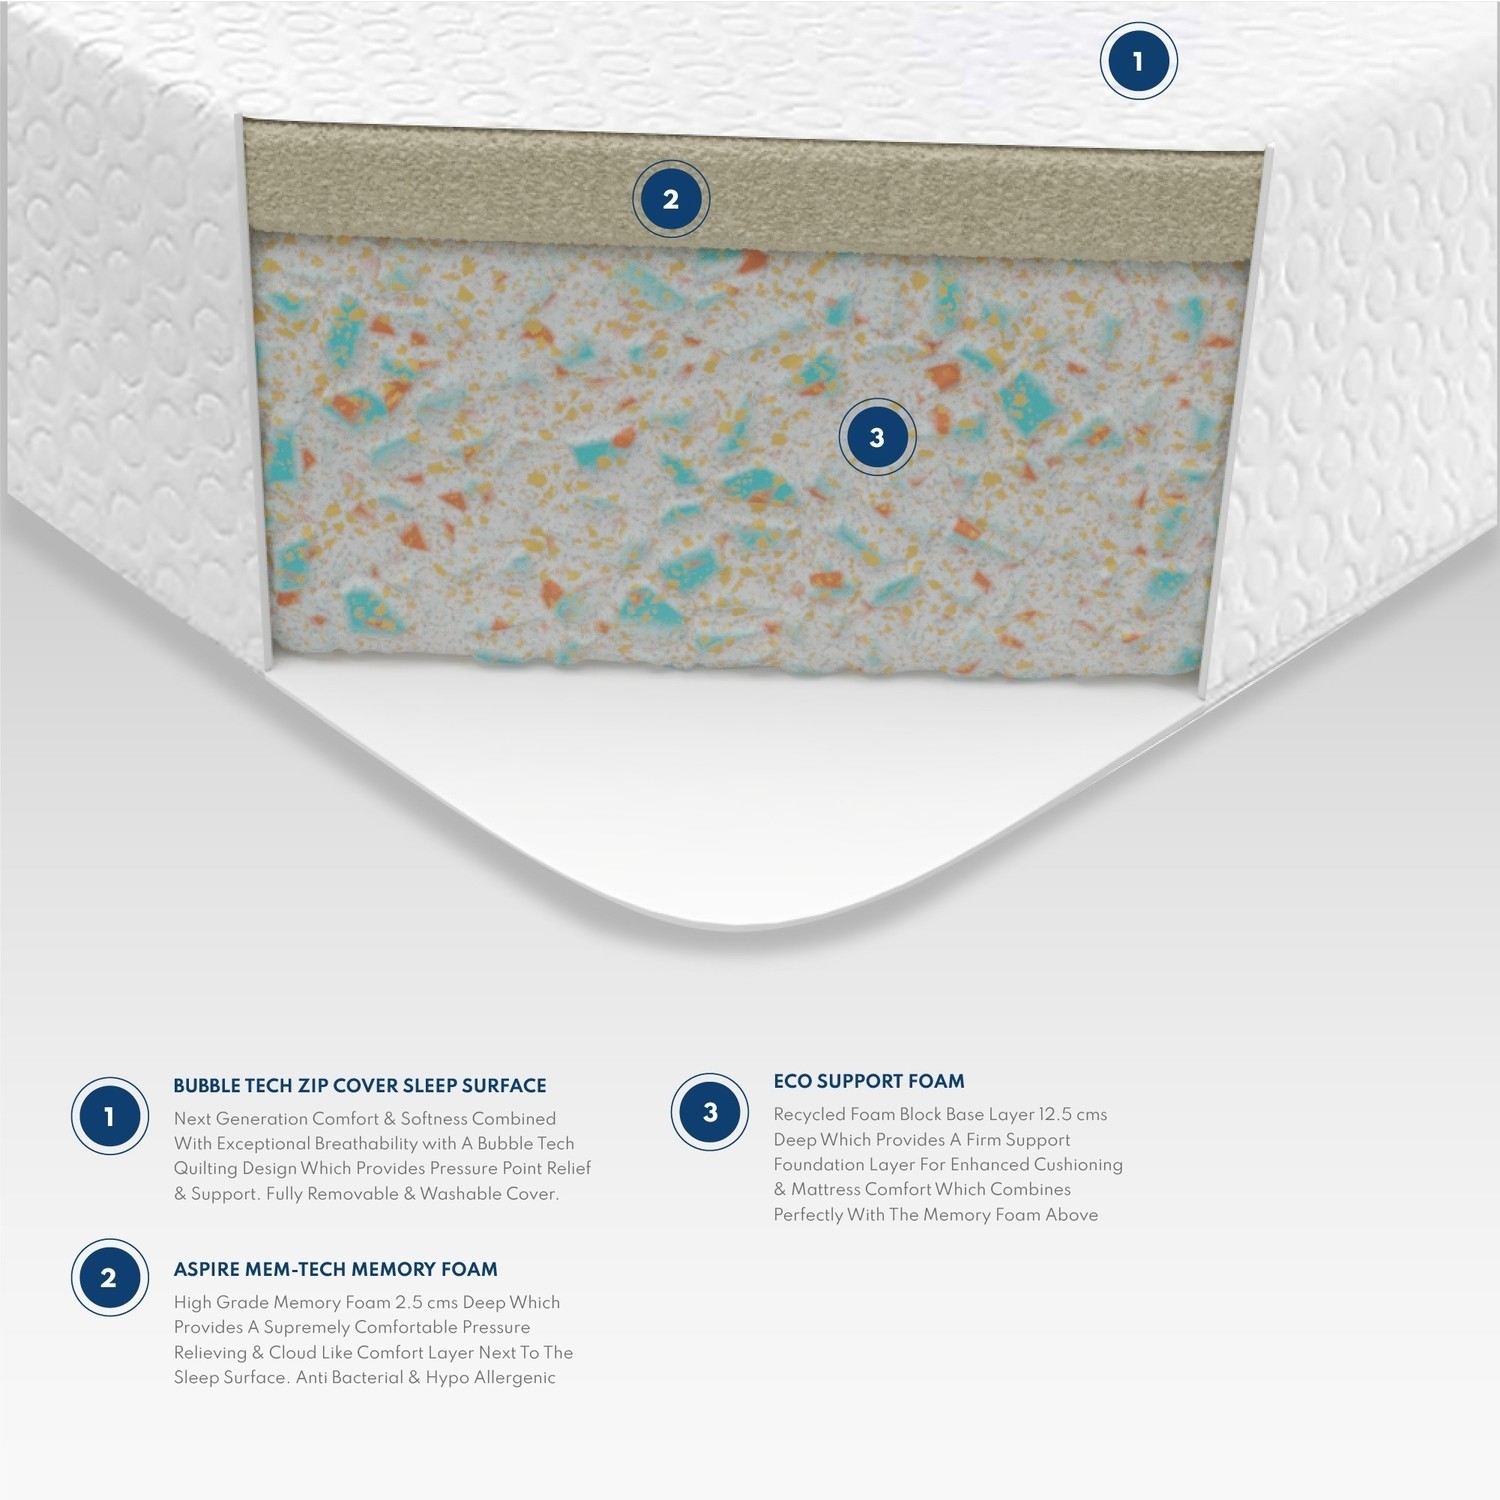 Read more about Single memory foam rolled hypoallergenic mattress with removable cover aspire